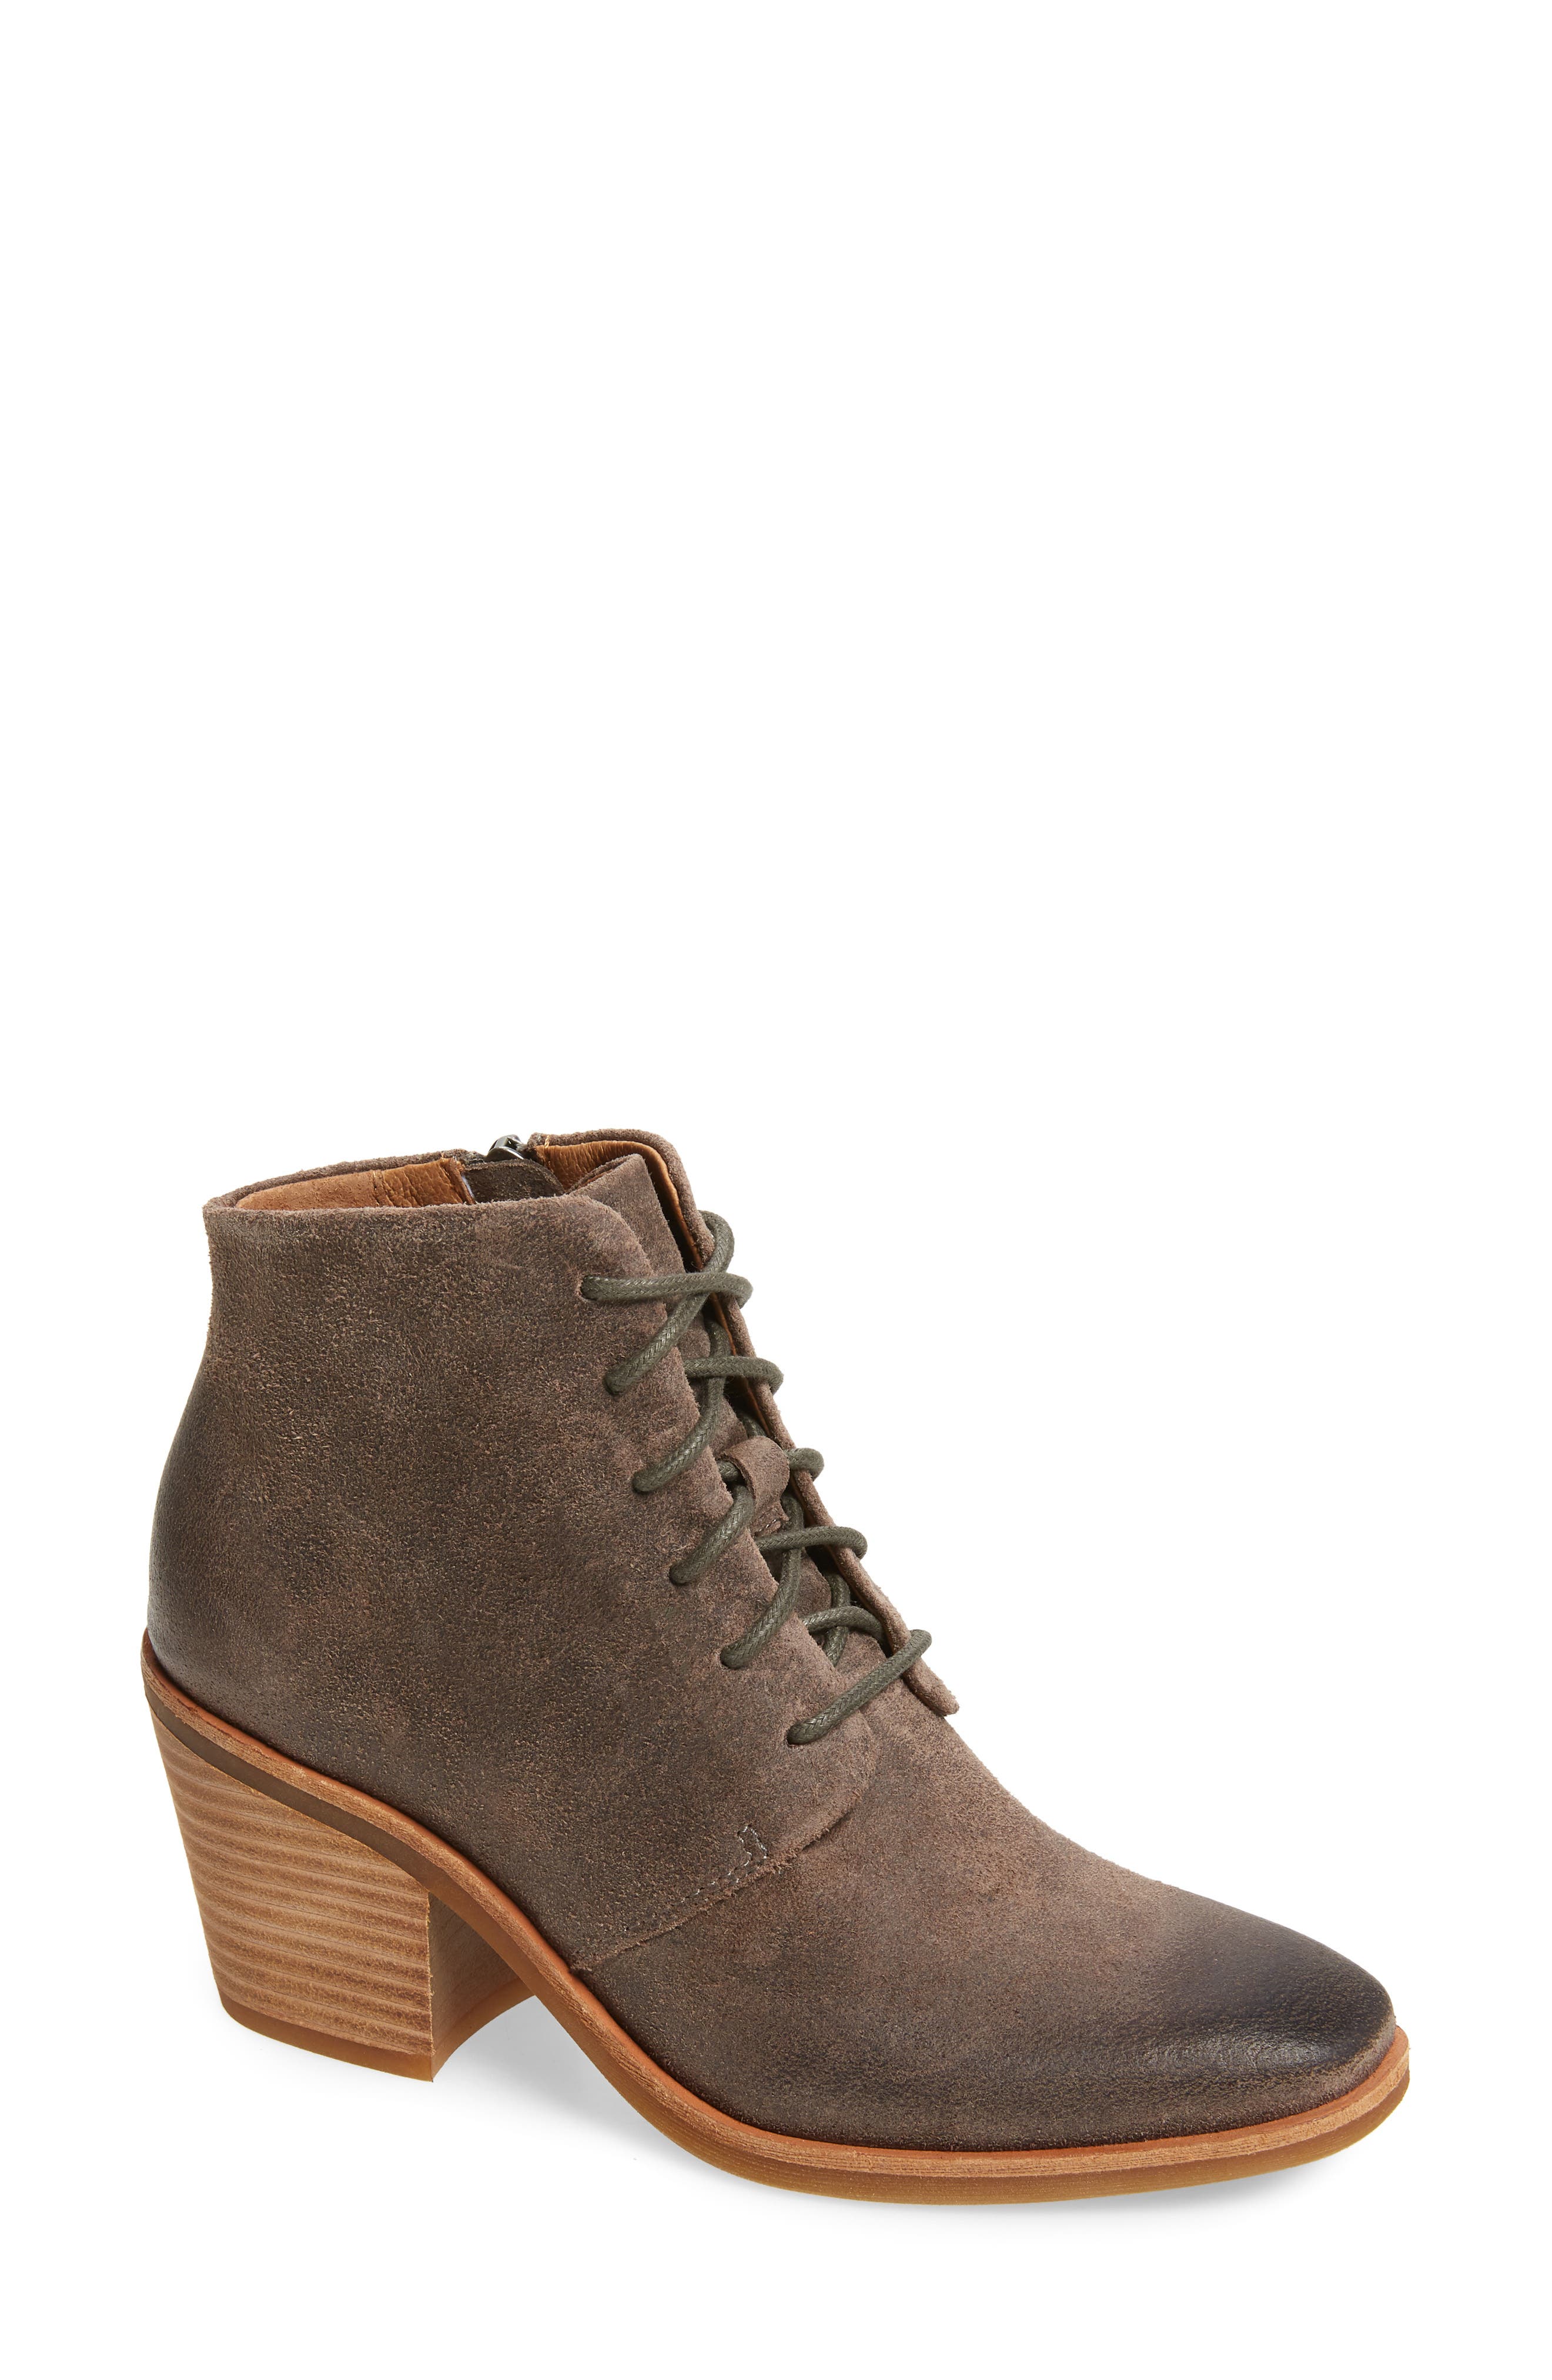 nordstrom grey boots